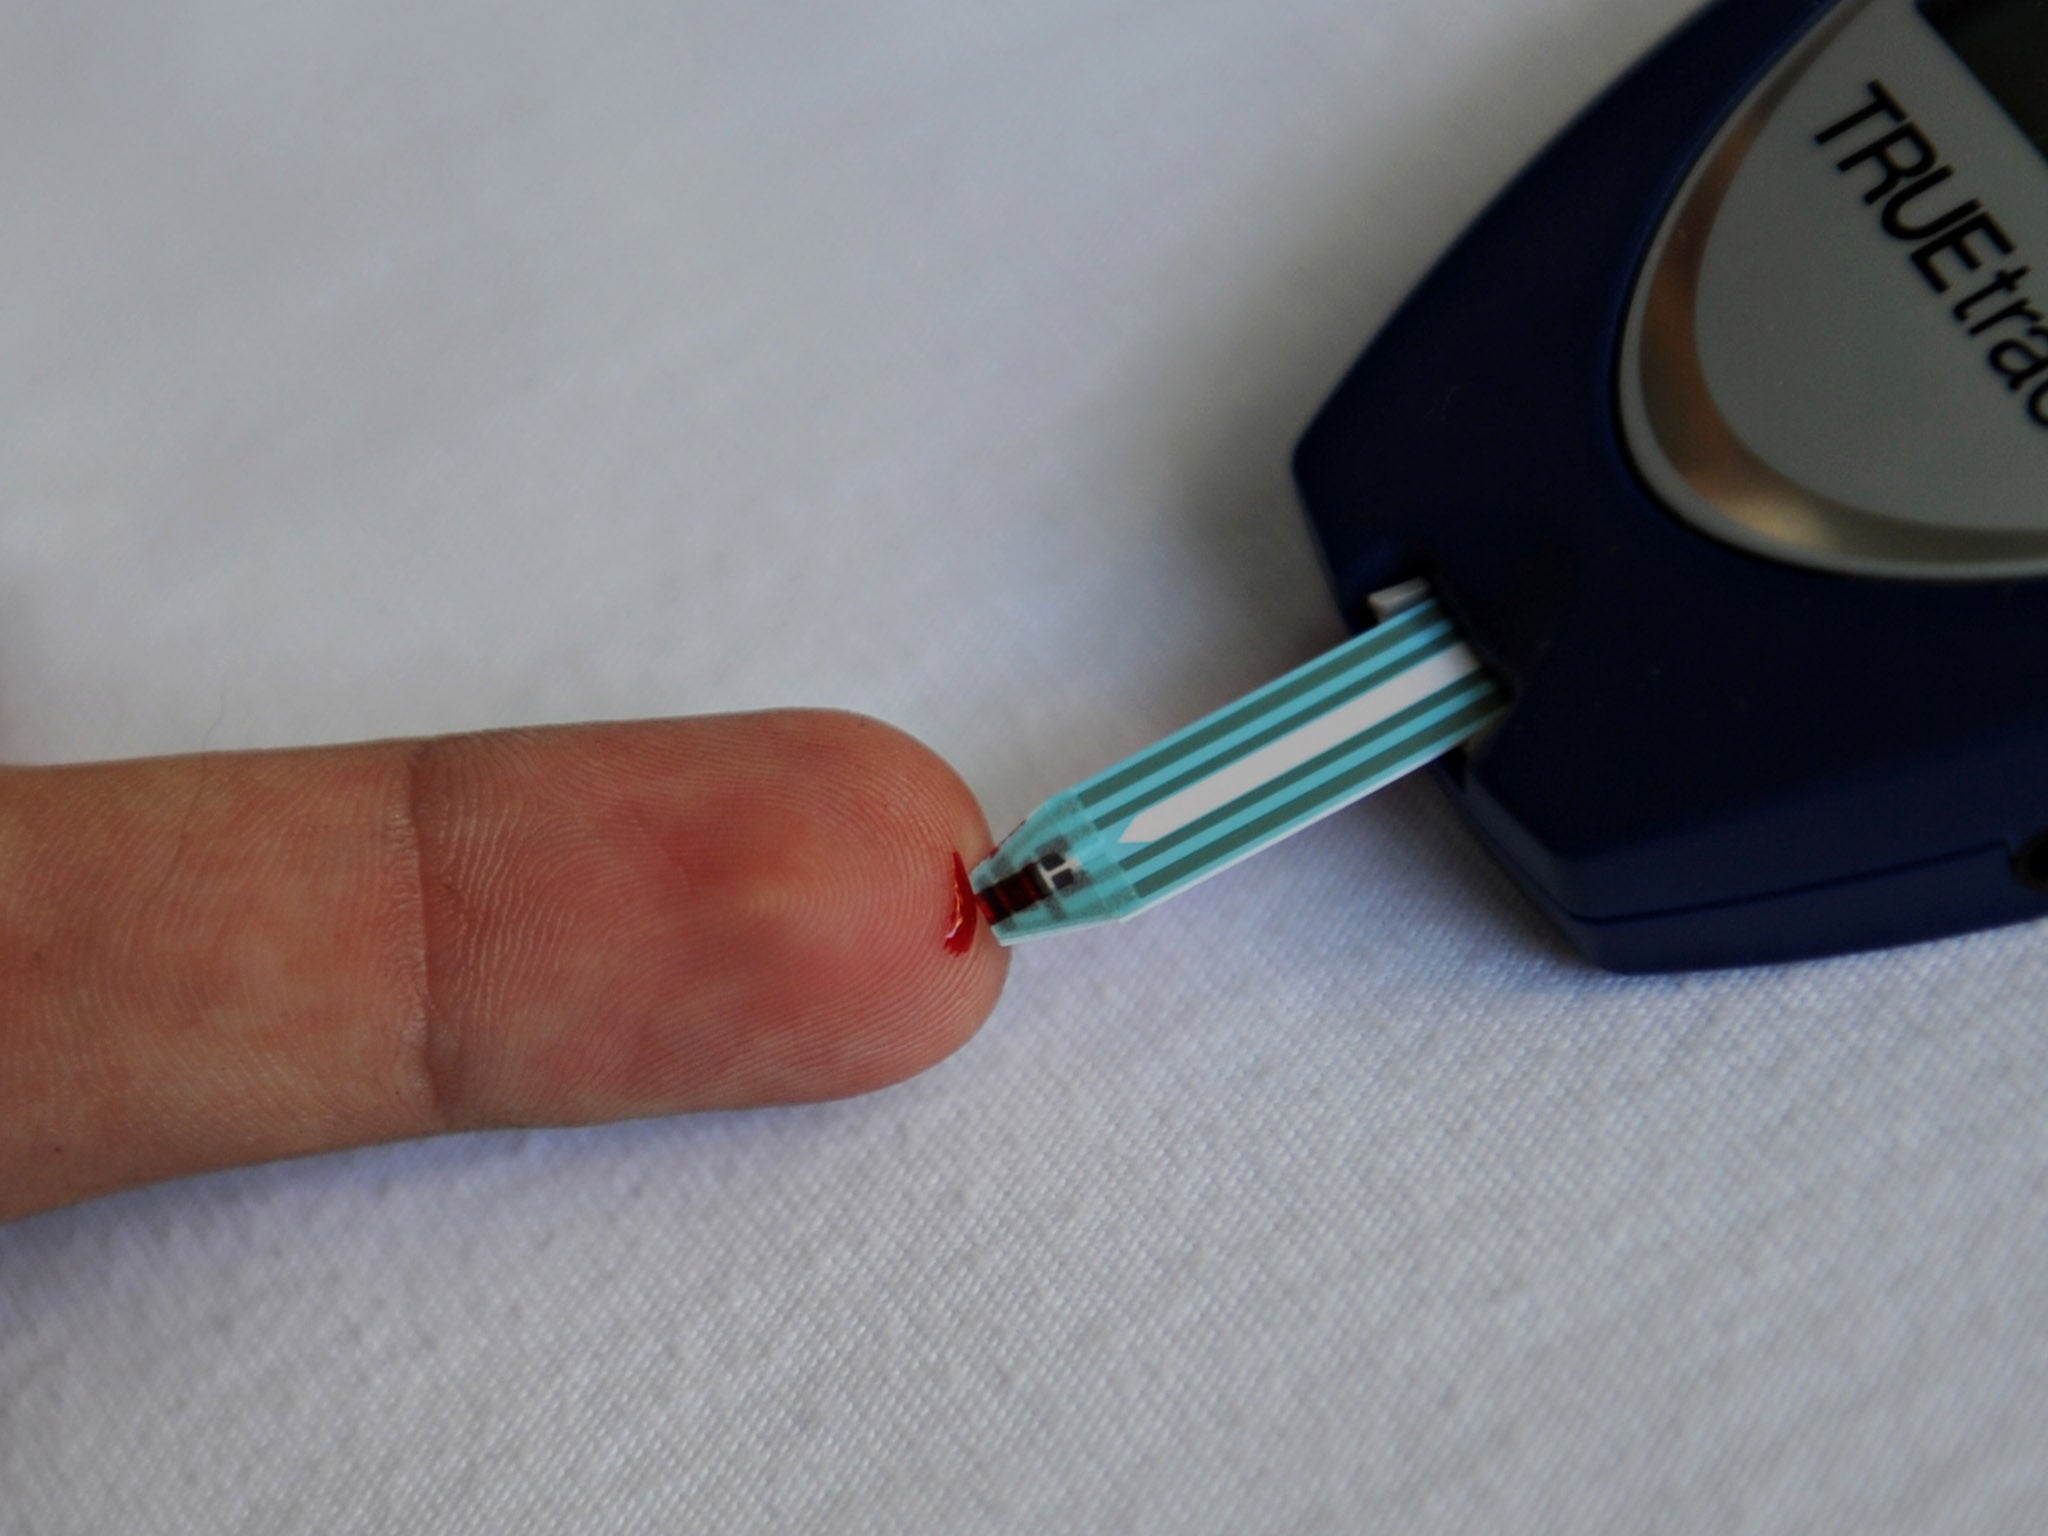 A diabetes test: Diabetes rates are soaring in the United States